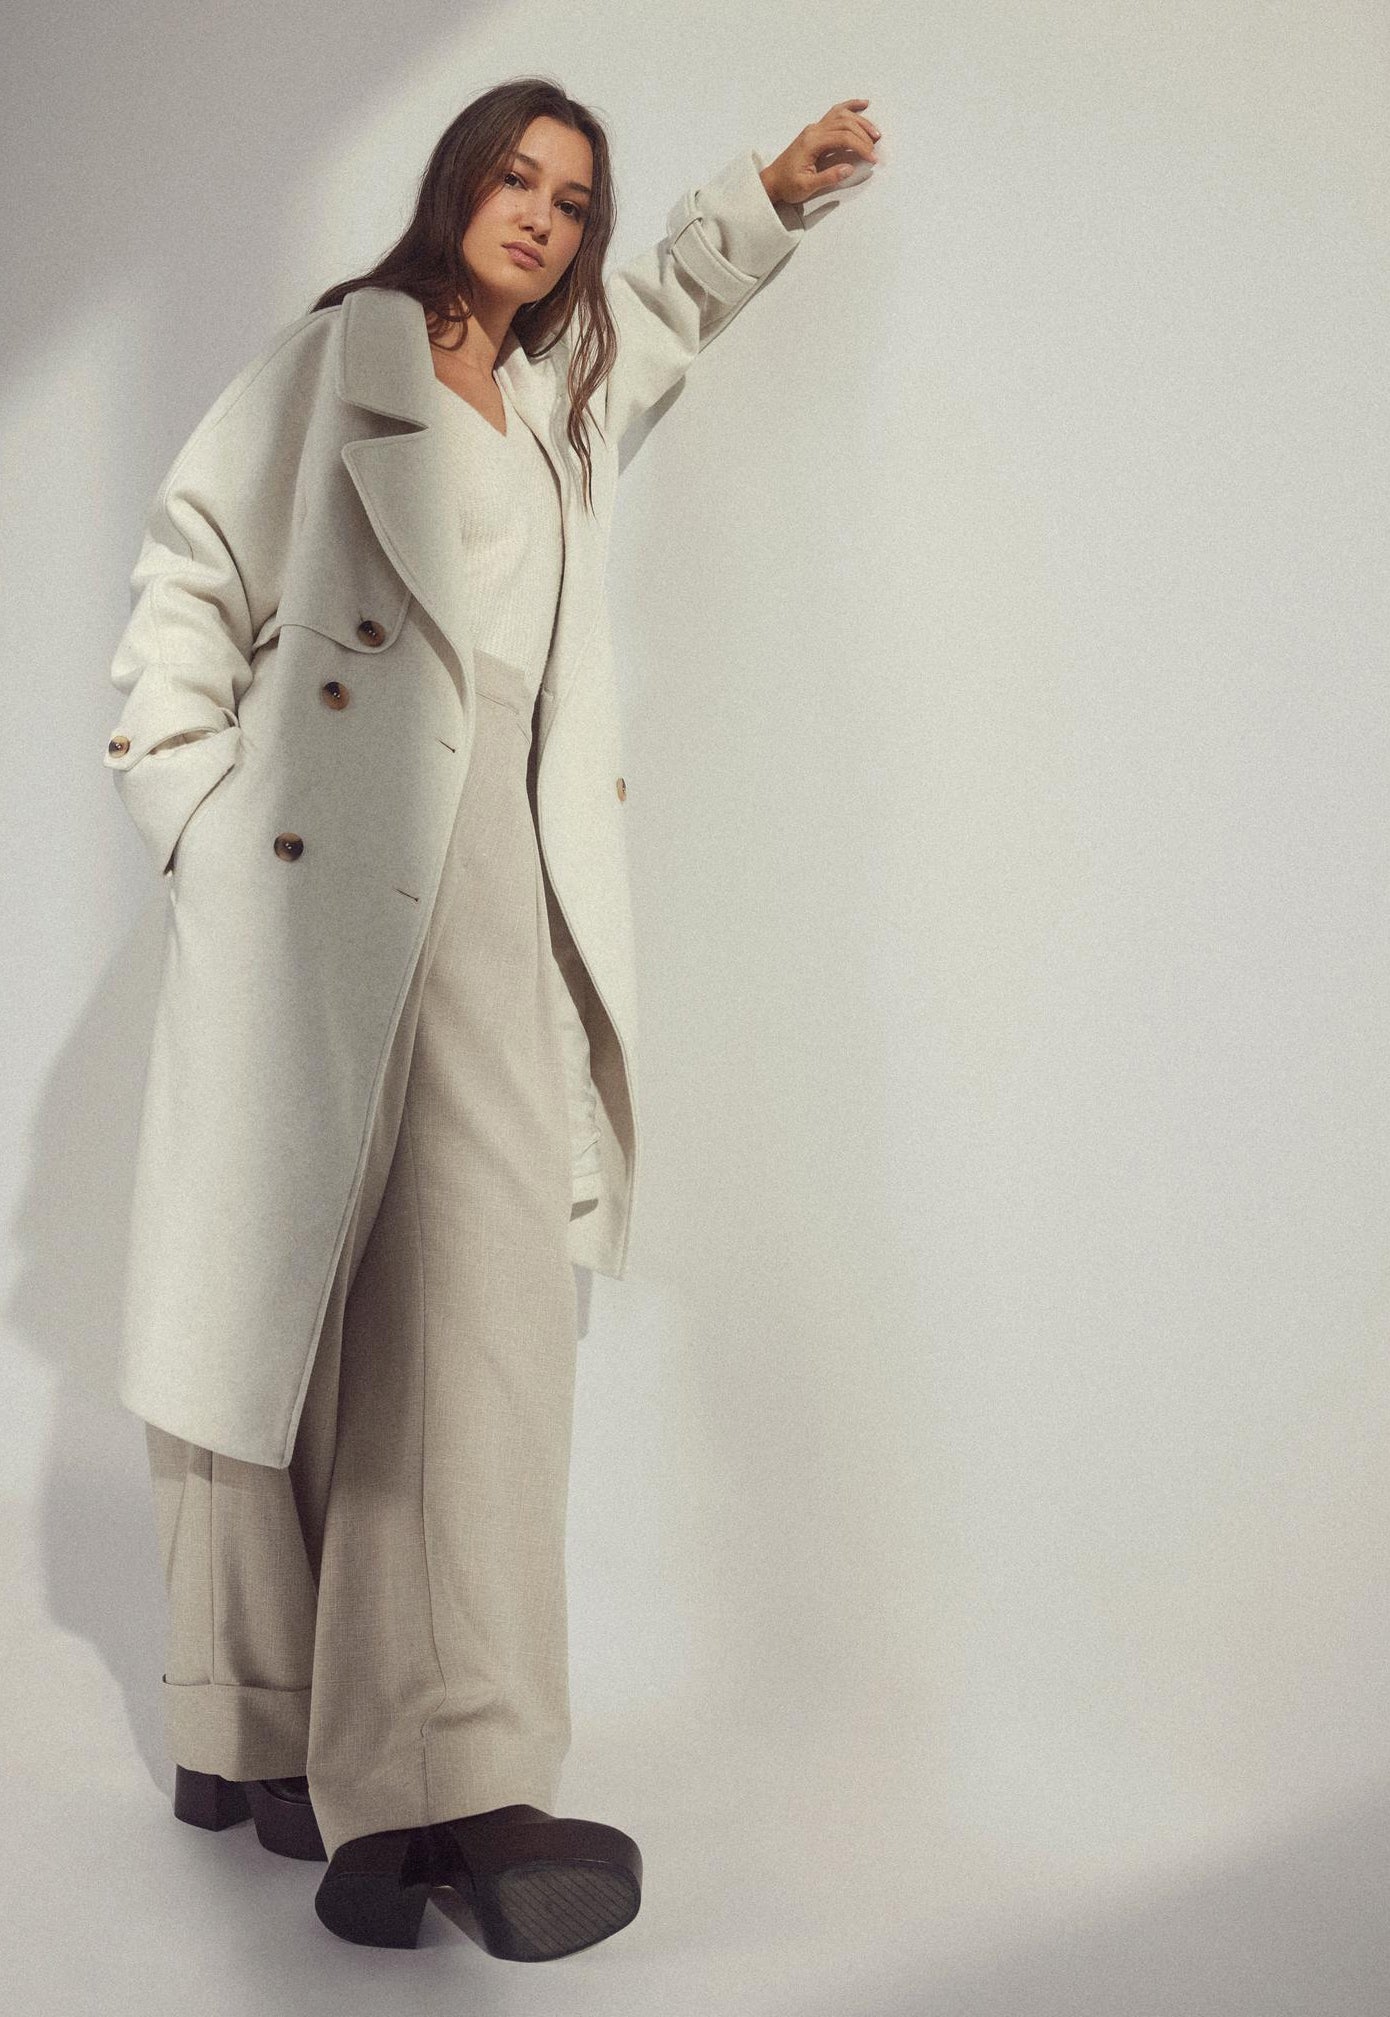 
                  
                    VILA Landra Smart Double Breasted Longline Wool Trench Coat in Cream - One Nation Clothing
                  
                